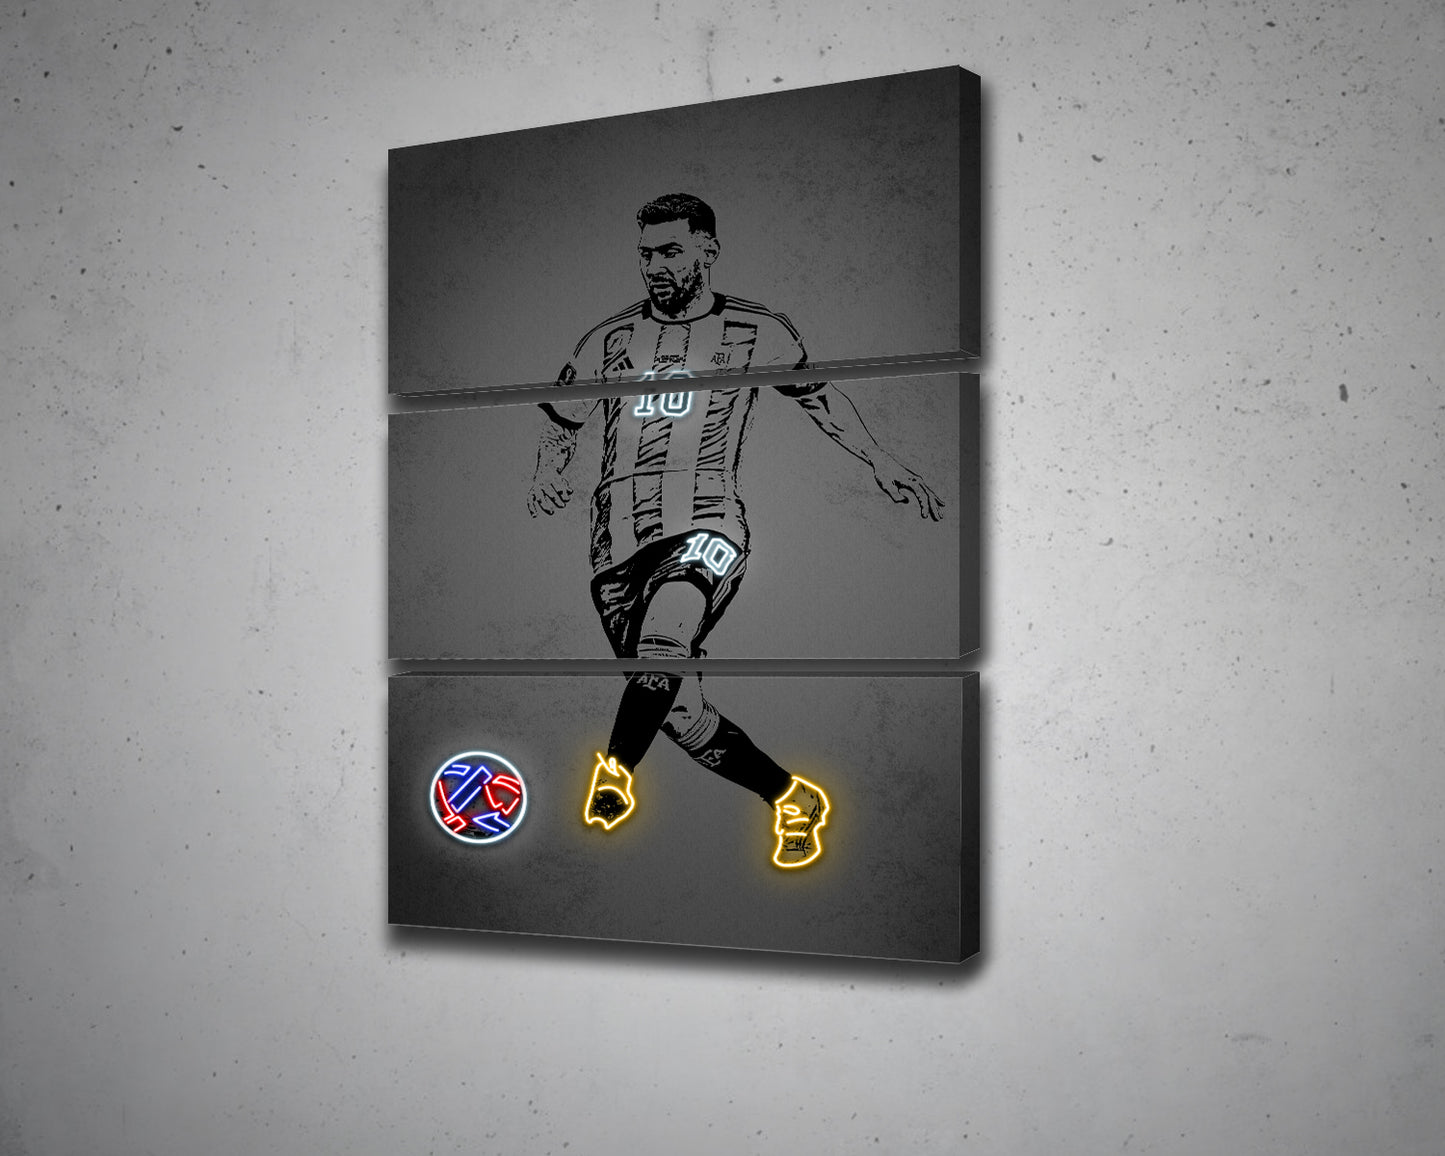 Lionel Messi Canvas Wall Art 